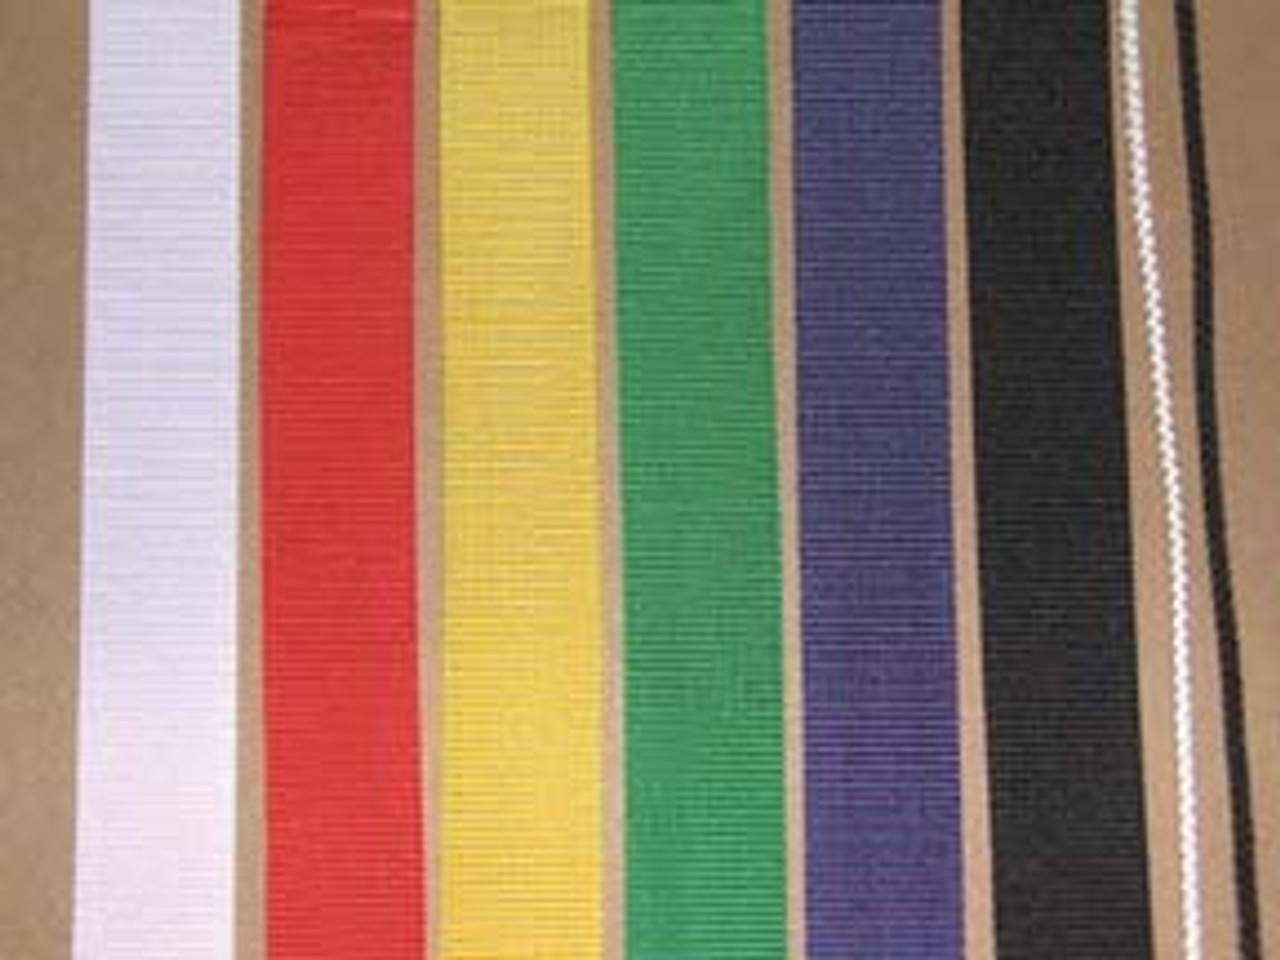 Nylon Strap (1 wide)  Sold per 1 Yard (3 foot) increments